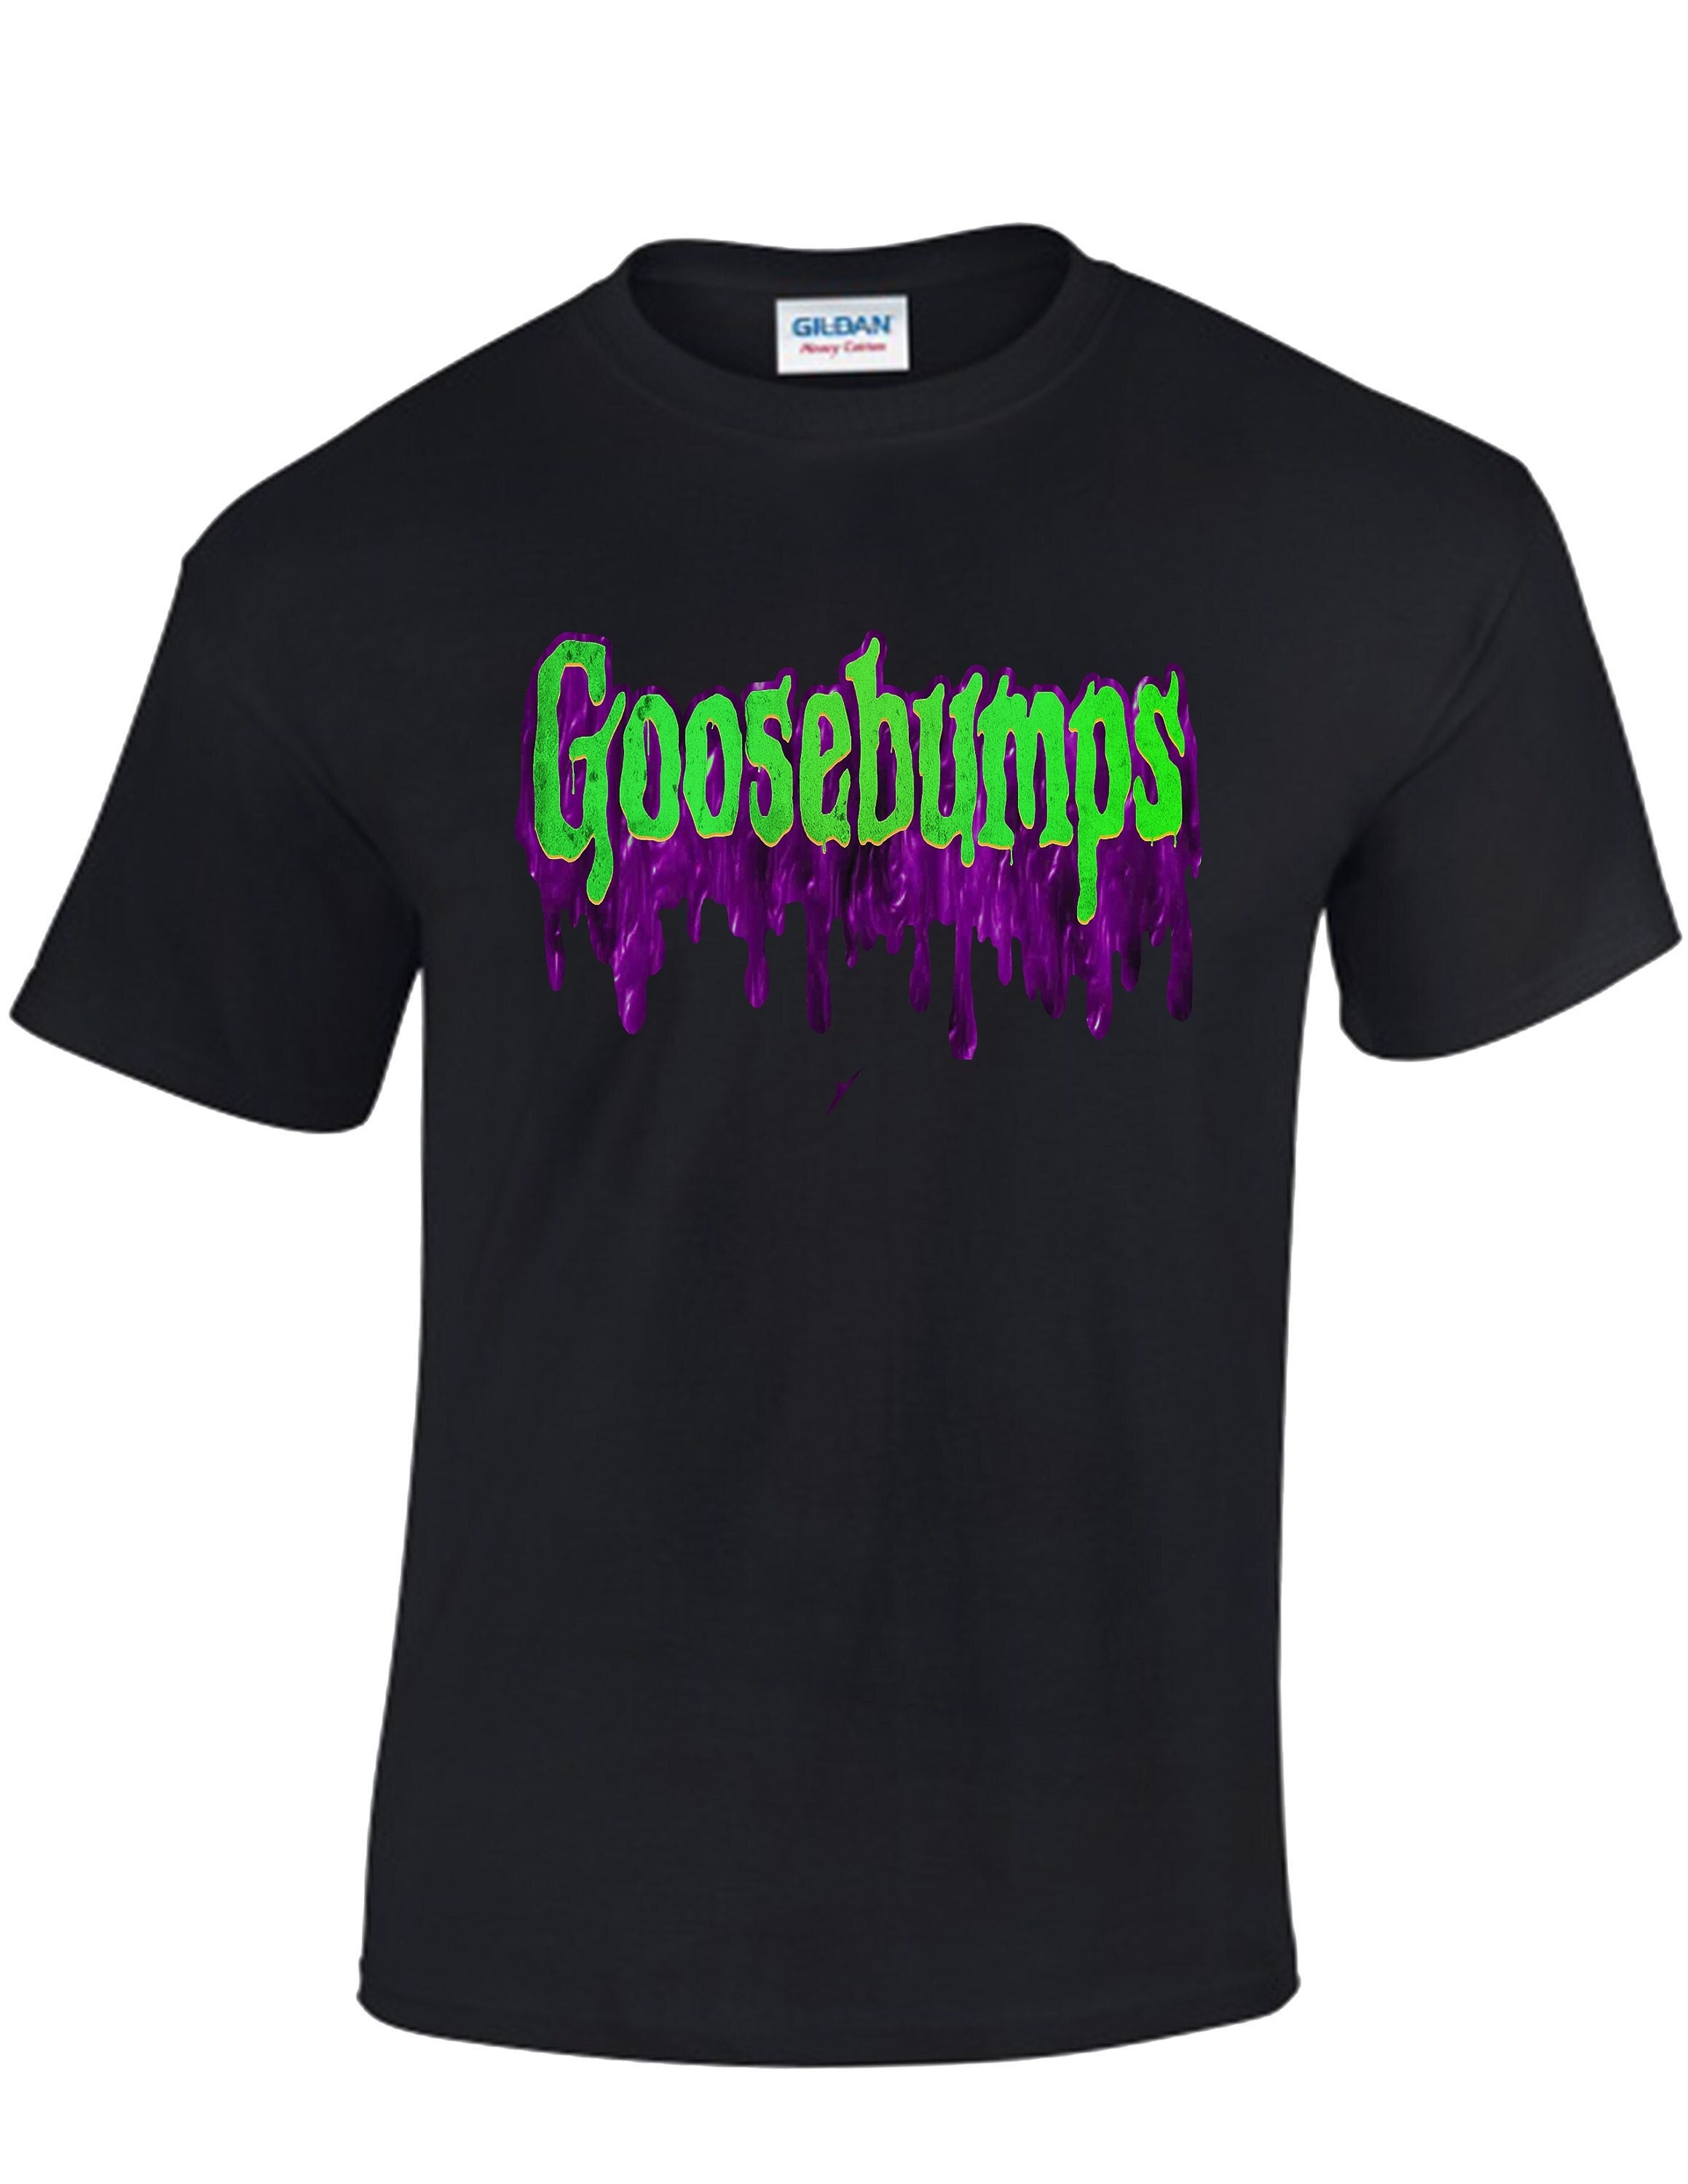 Goosebumps Logo Custom Shirt Many Sizes & Colors for All Ages 